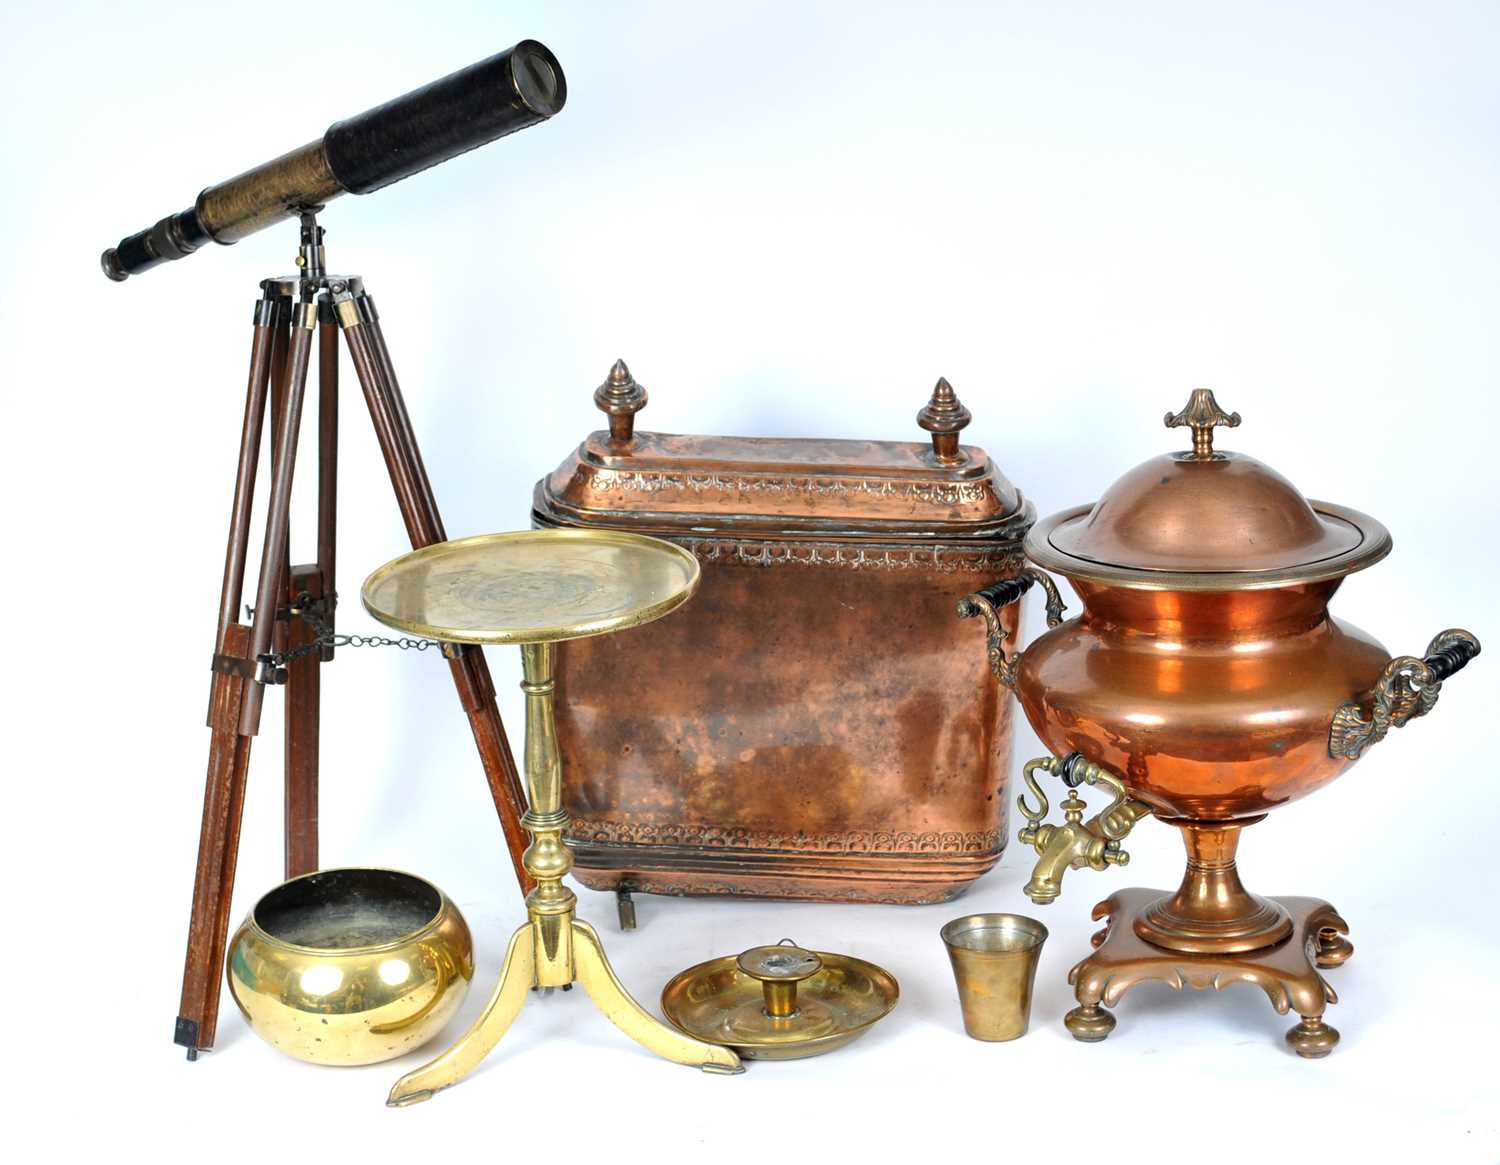 An interesting mixed collection of antique copper and brass wares